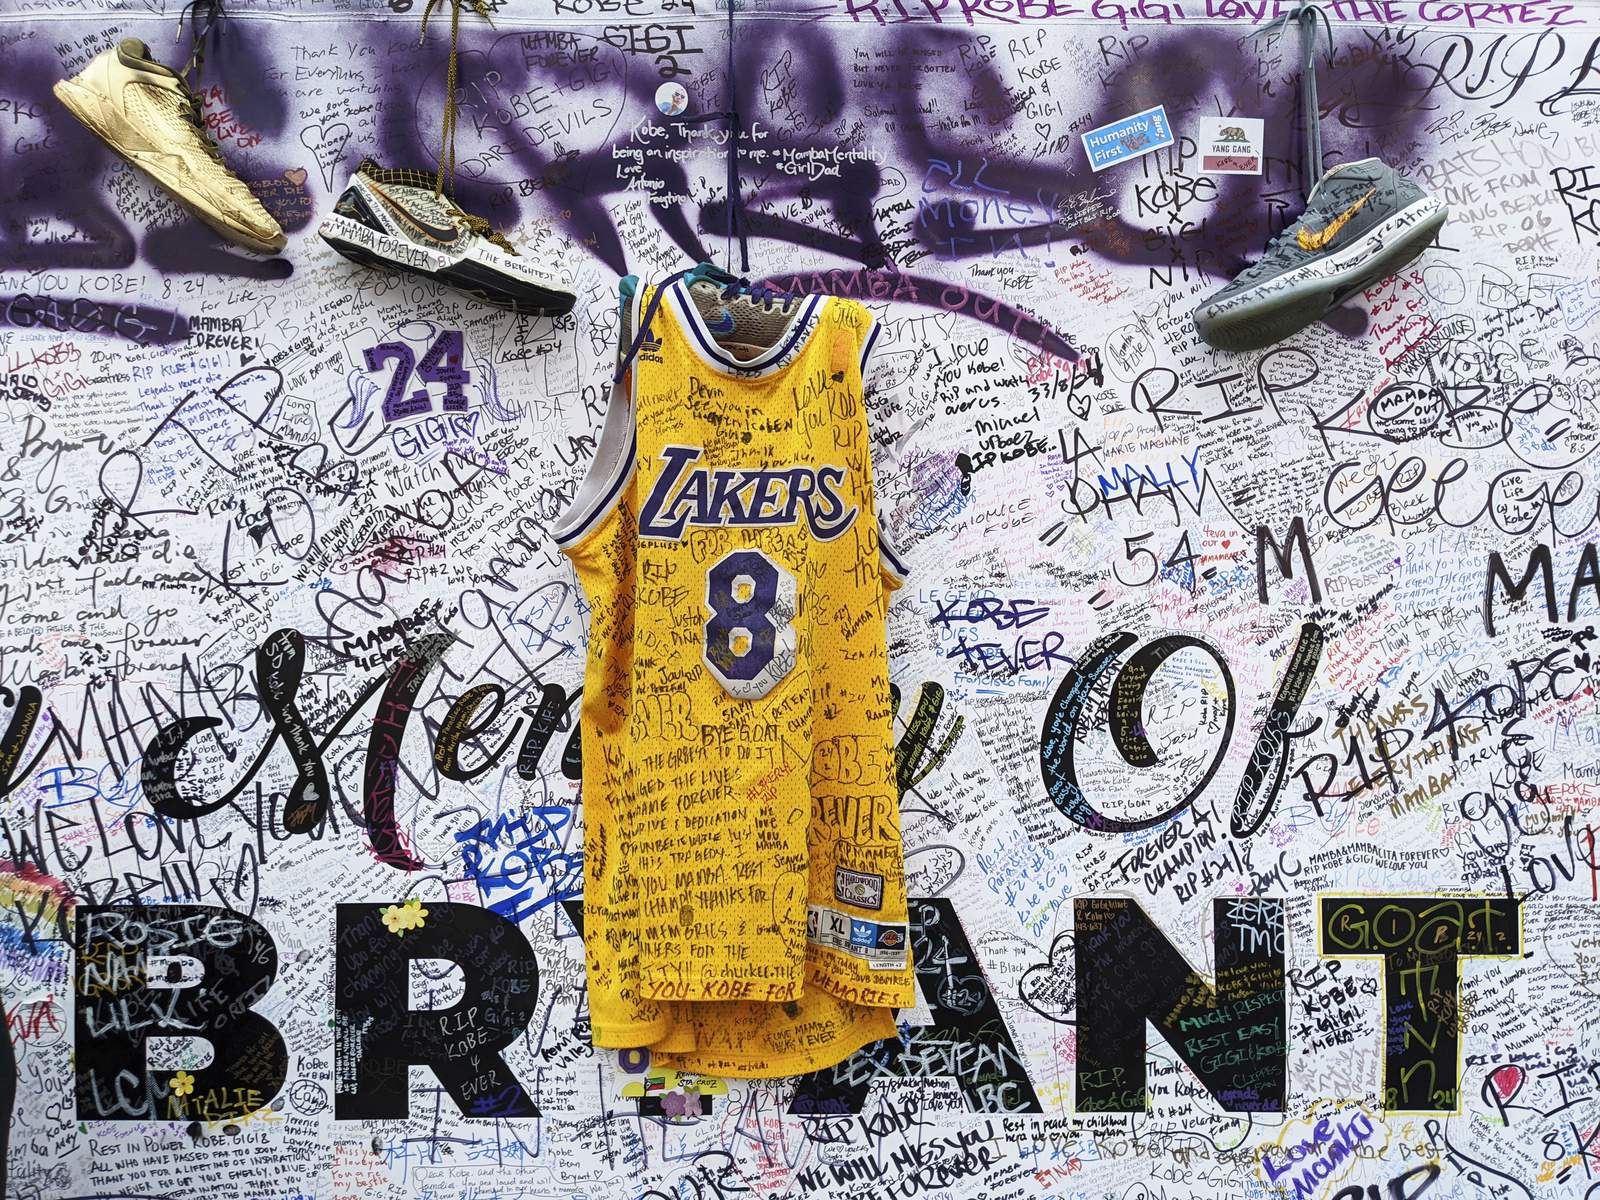 Kobe’s presence remains strong, legacy growing